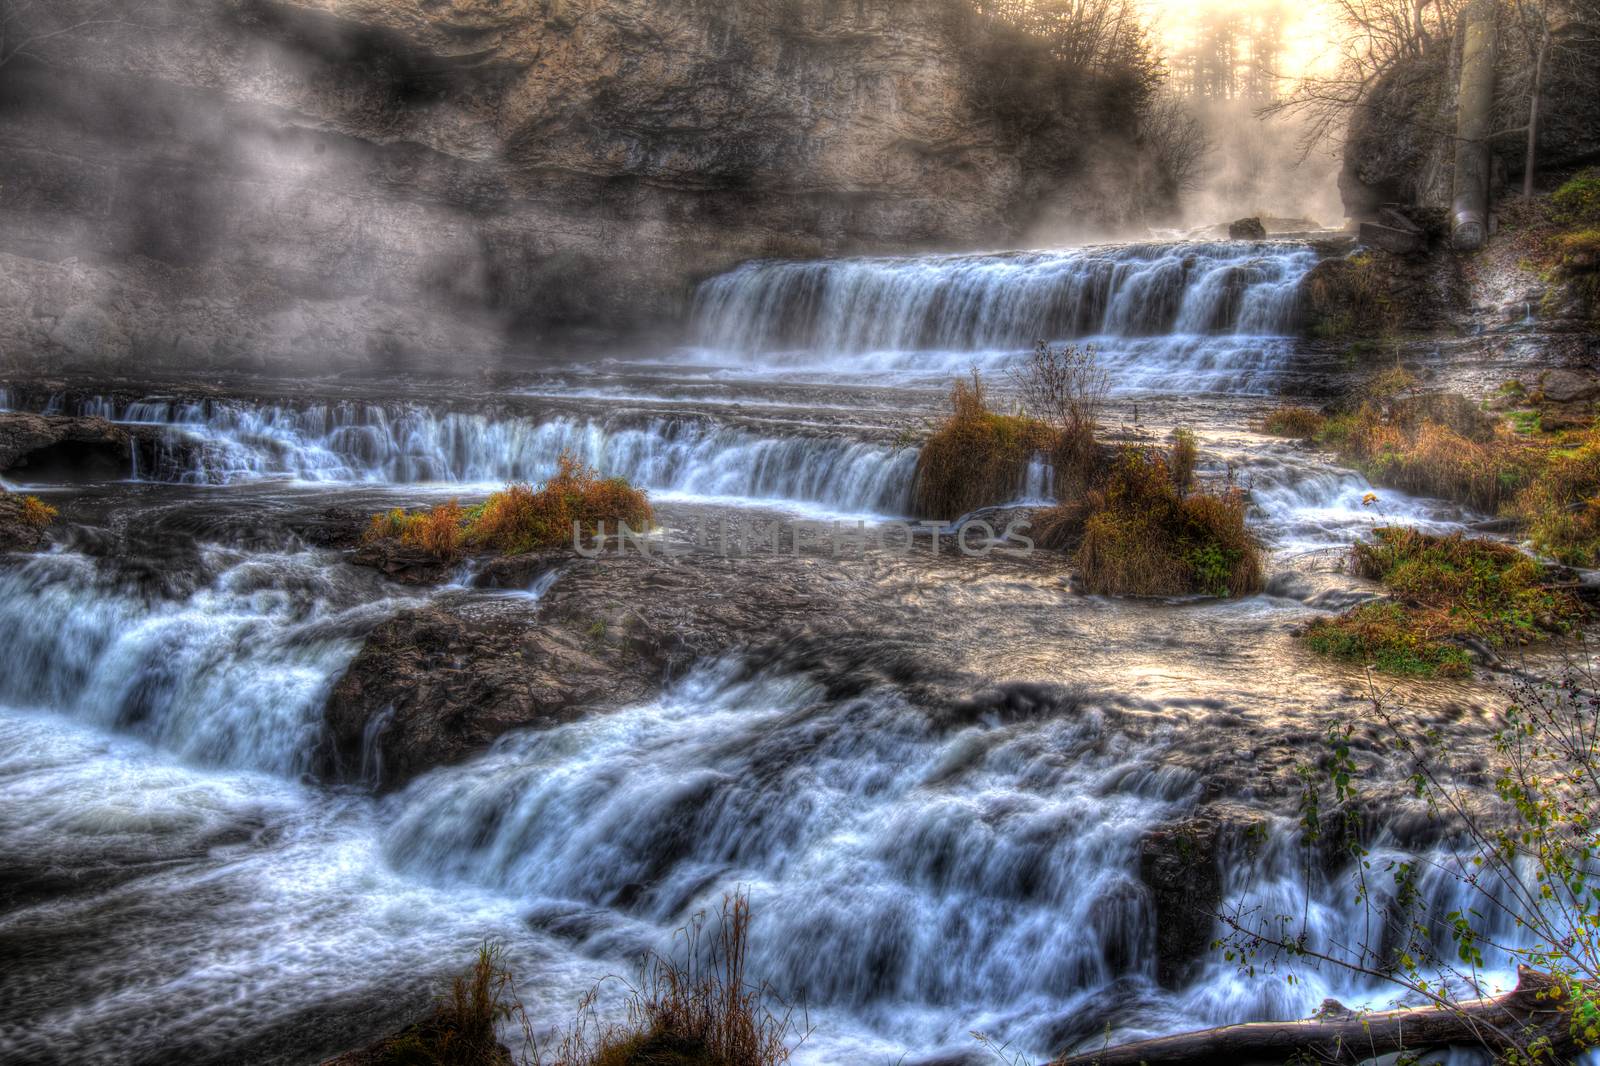 Colorful scenic waterfall in HDR by Coffee999